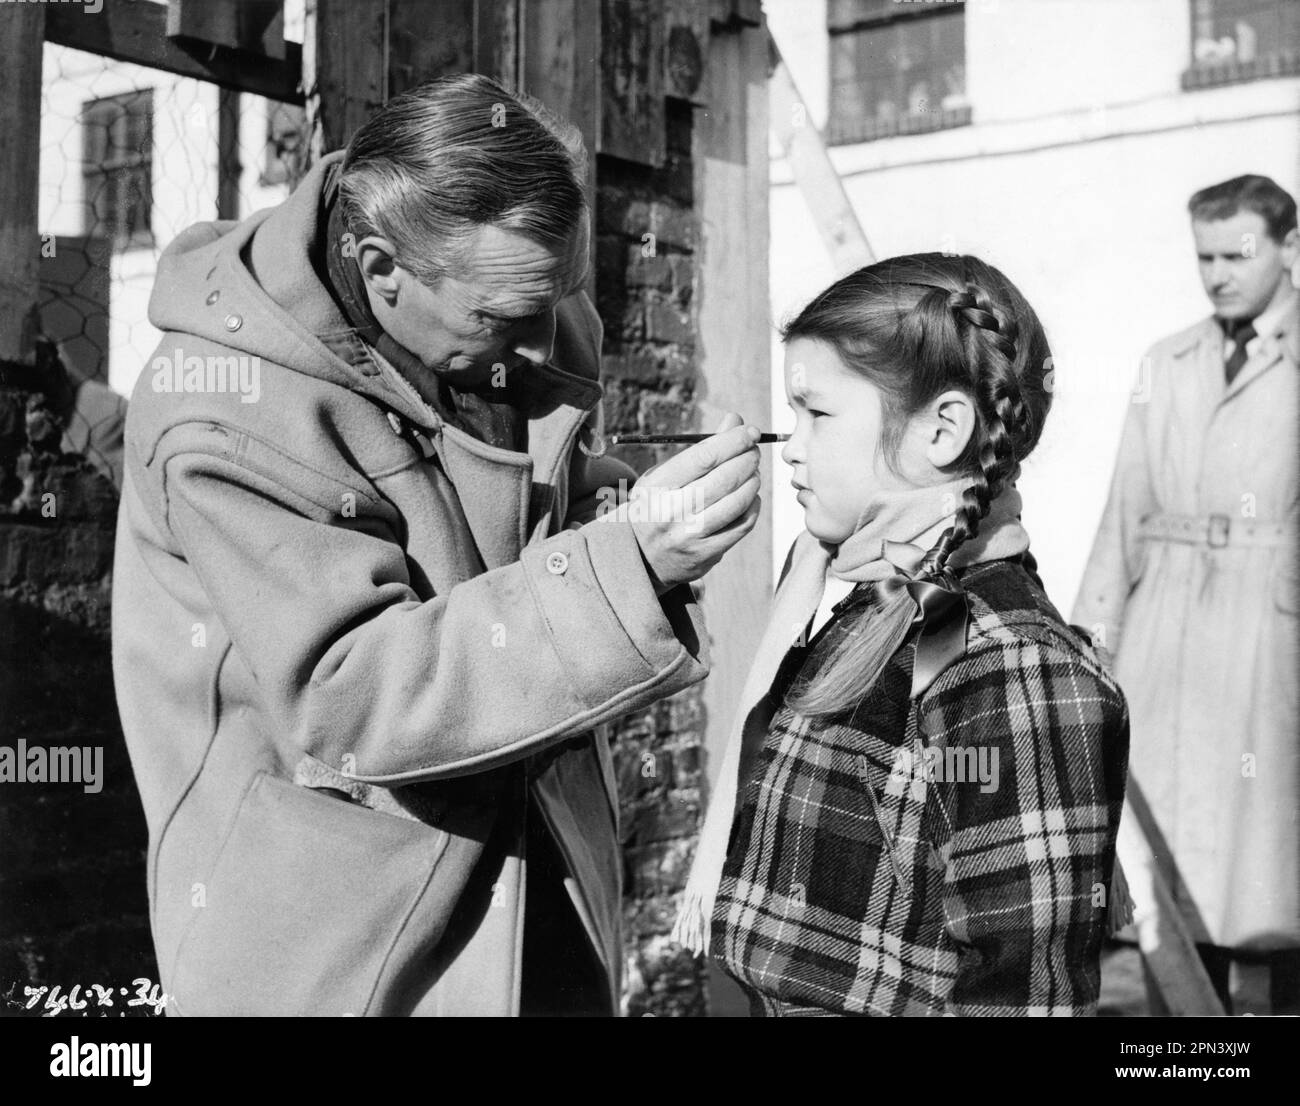 Make Up Artist (likely HARRY FRAMPTON)  touches up make-up on MANDY MILLER on set candid during filming of MANDY 1952 director ALEXANDER MACKENDRICK adapted from The Day is Ours by Hilda Lewis screenplay Nigel Balchin and Jack Whittingham costume design Anthony Mendleson music William Alwyn producers Michael Balcon and Leslie Norman Michael Balcon Productions / Ealing Studios / General Film Distributors (GFD) Stock Photo